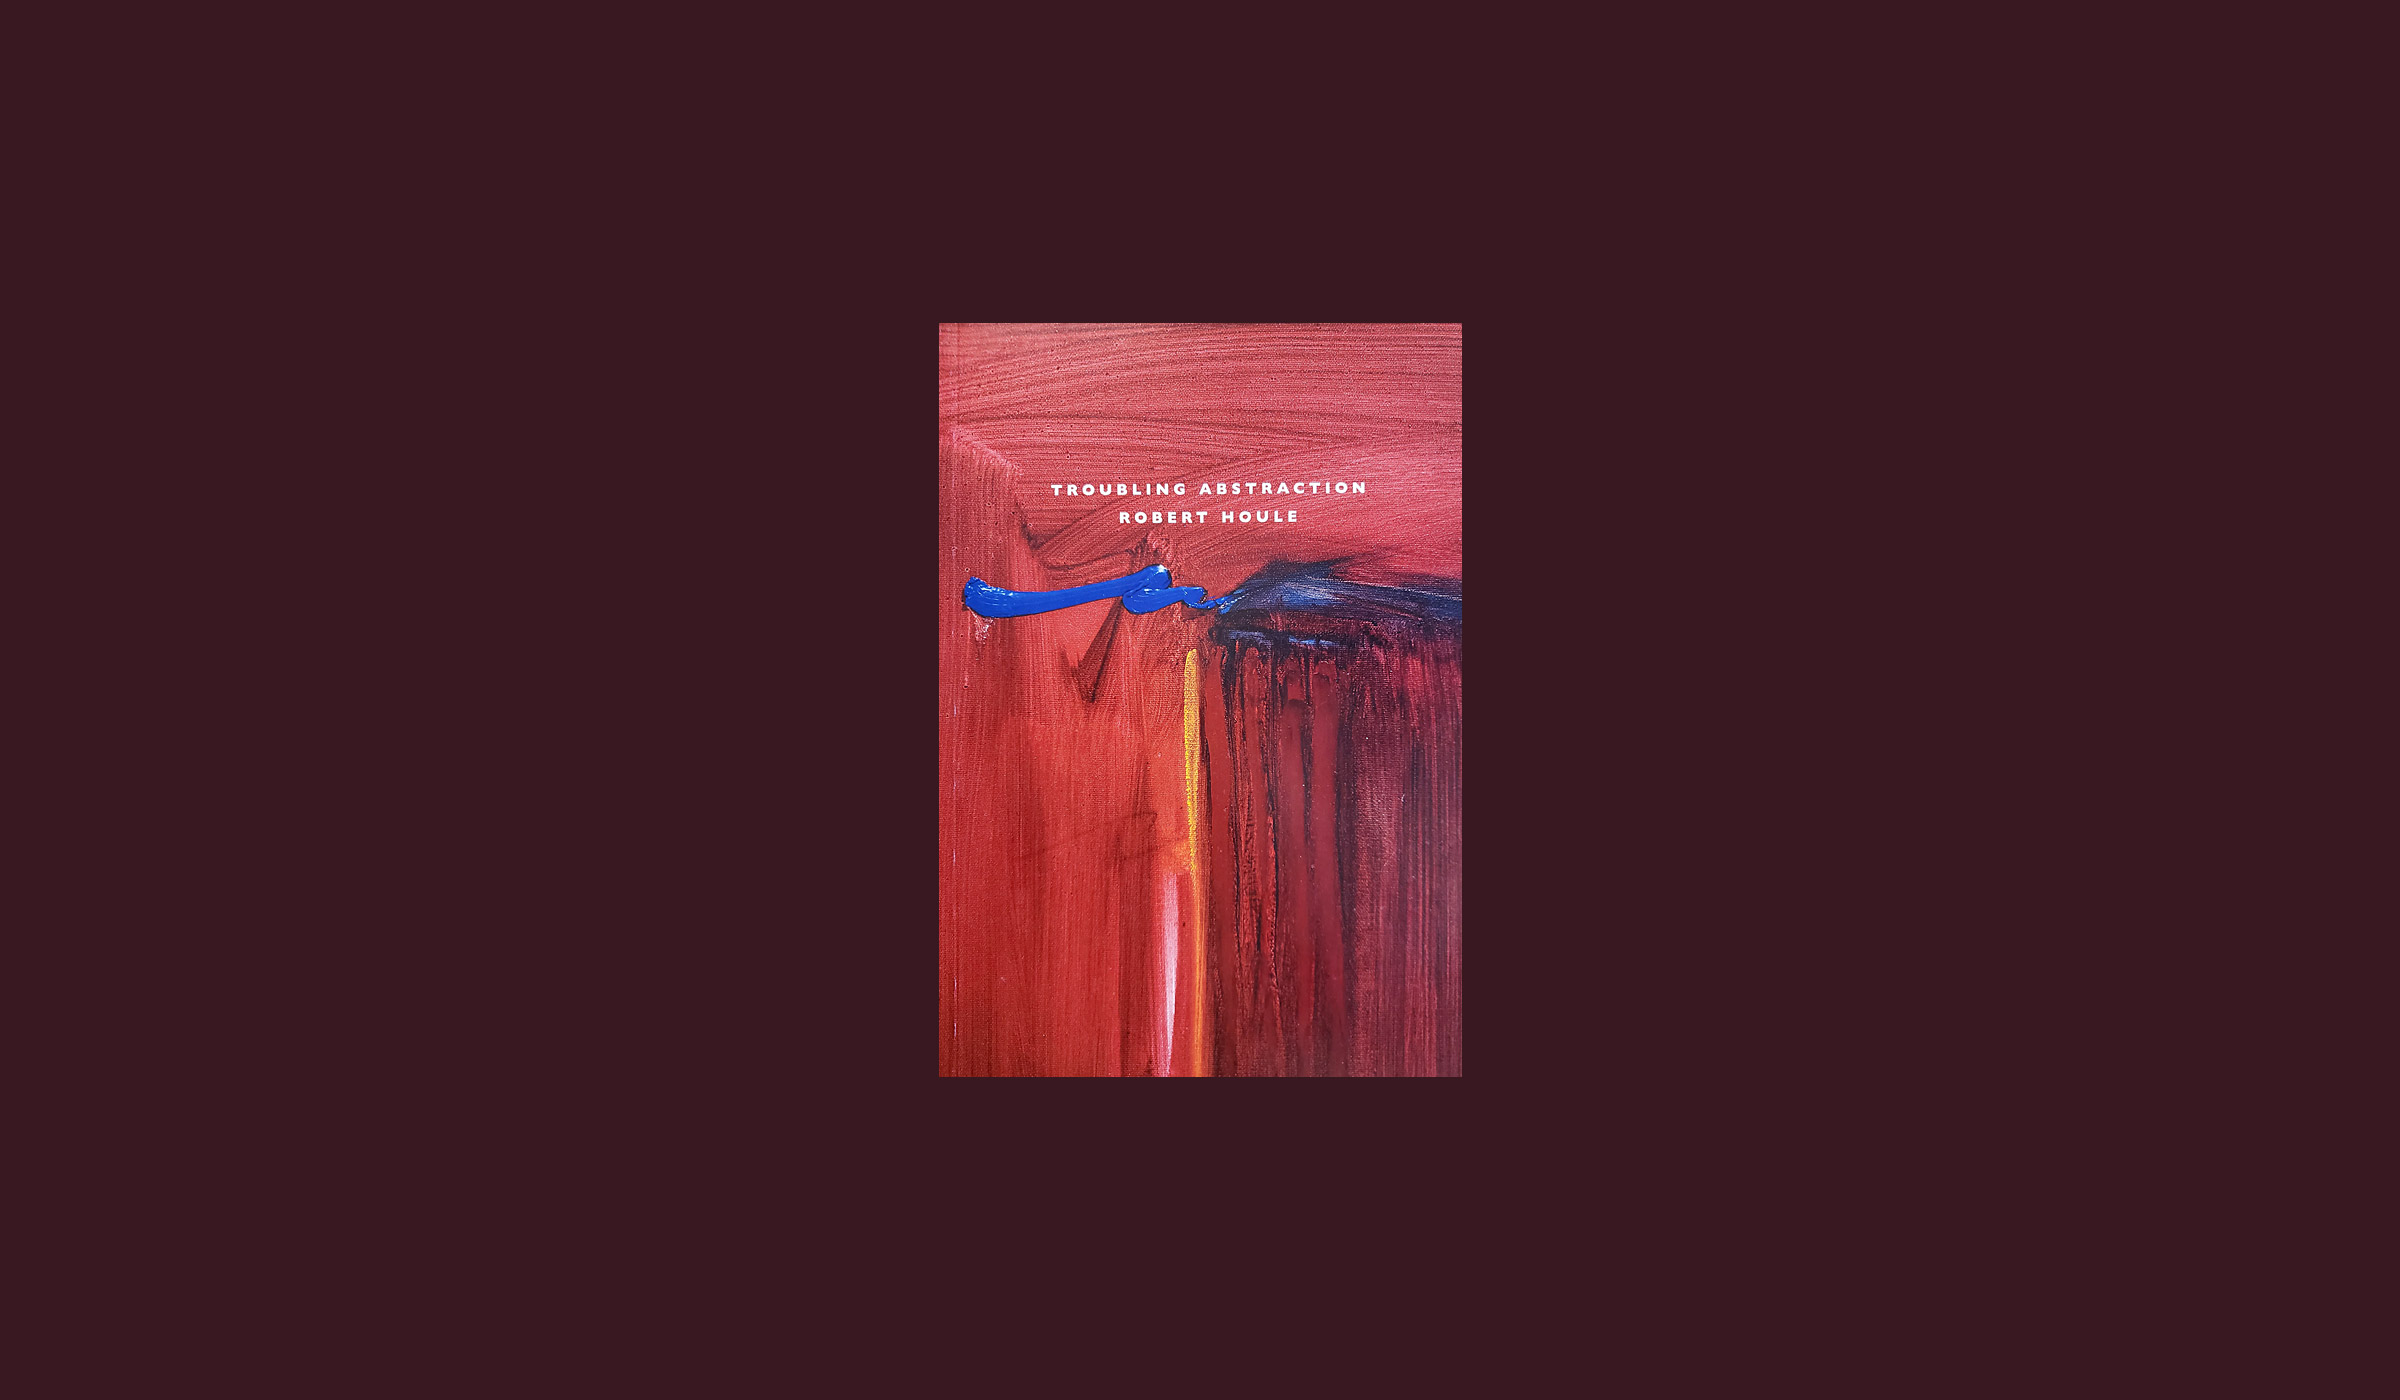 Book cover with image of abstract red and blue painting